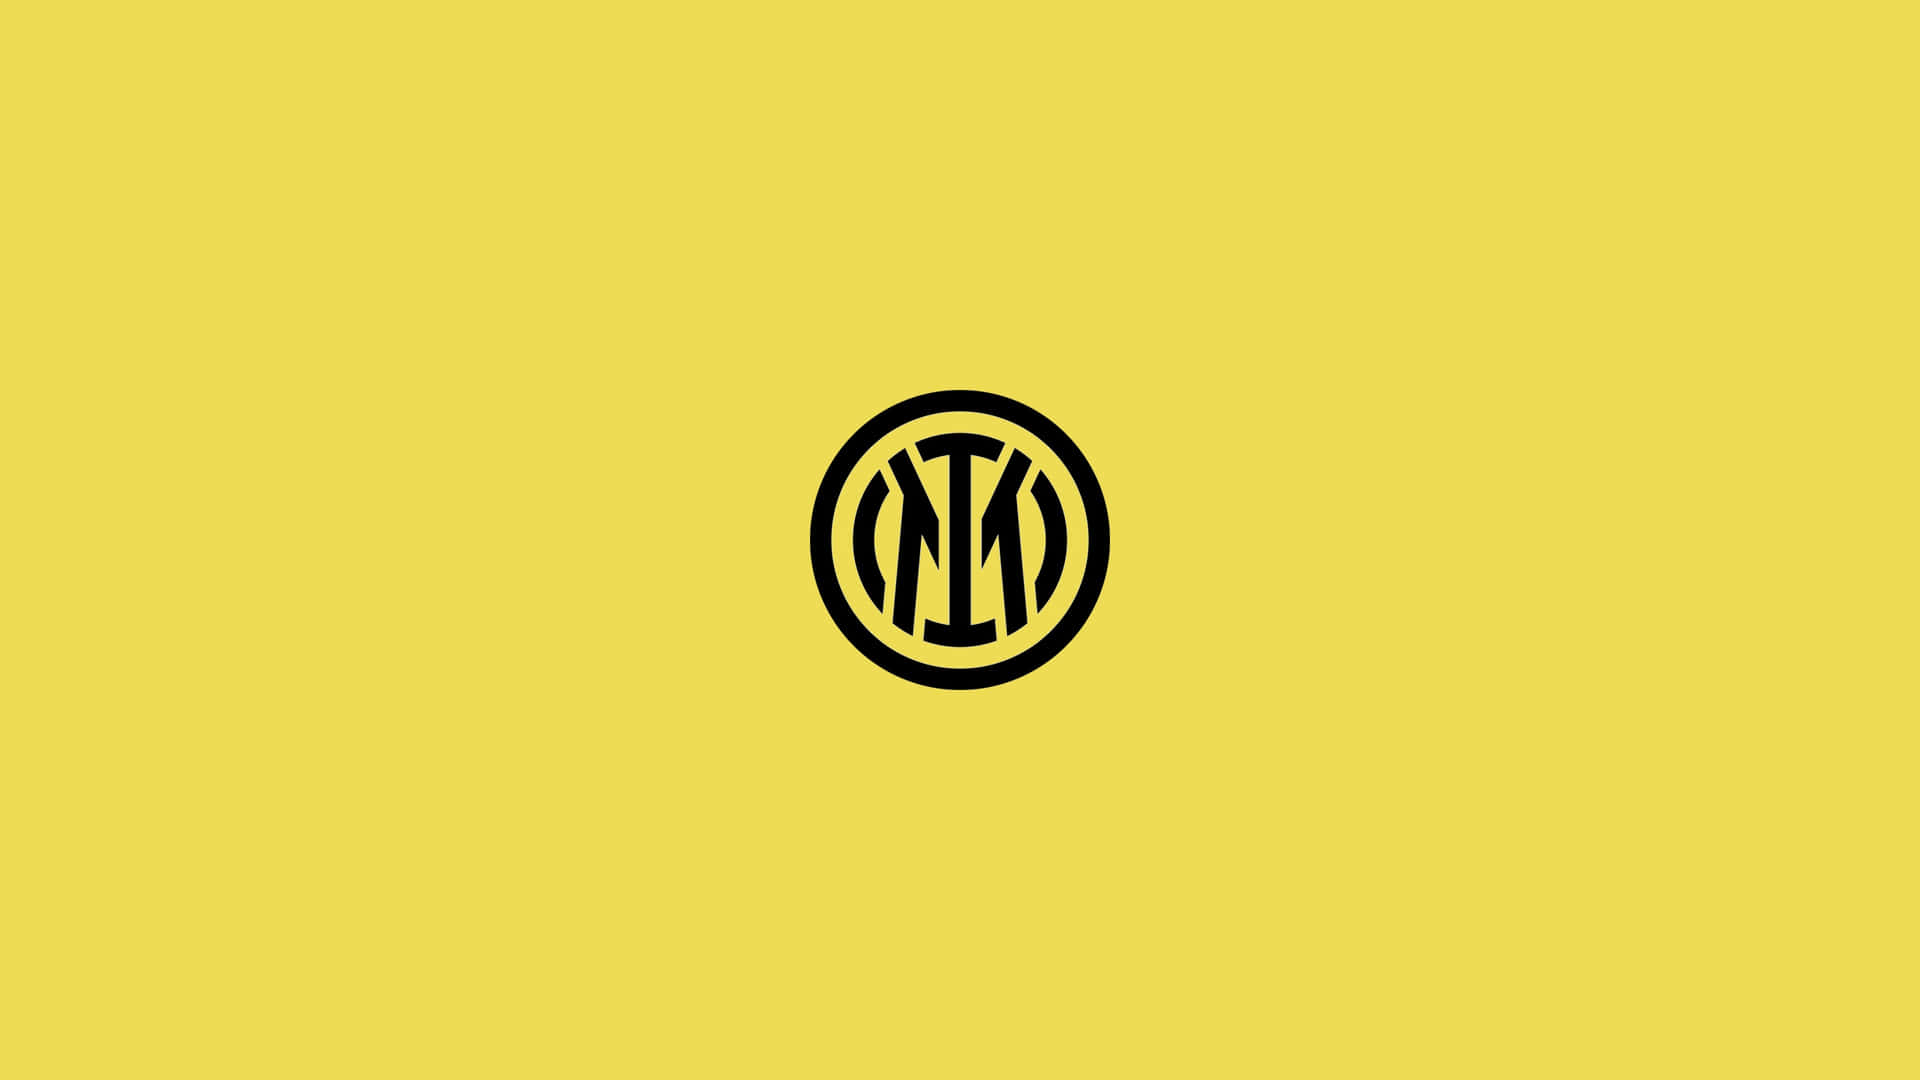 Intermilan Is One Of The Most Prestigious And Successful Football Clubs In Italy. Fondo de pantalla